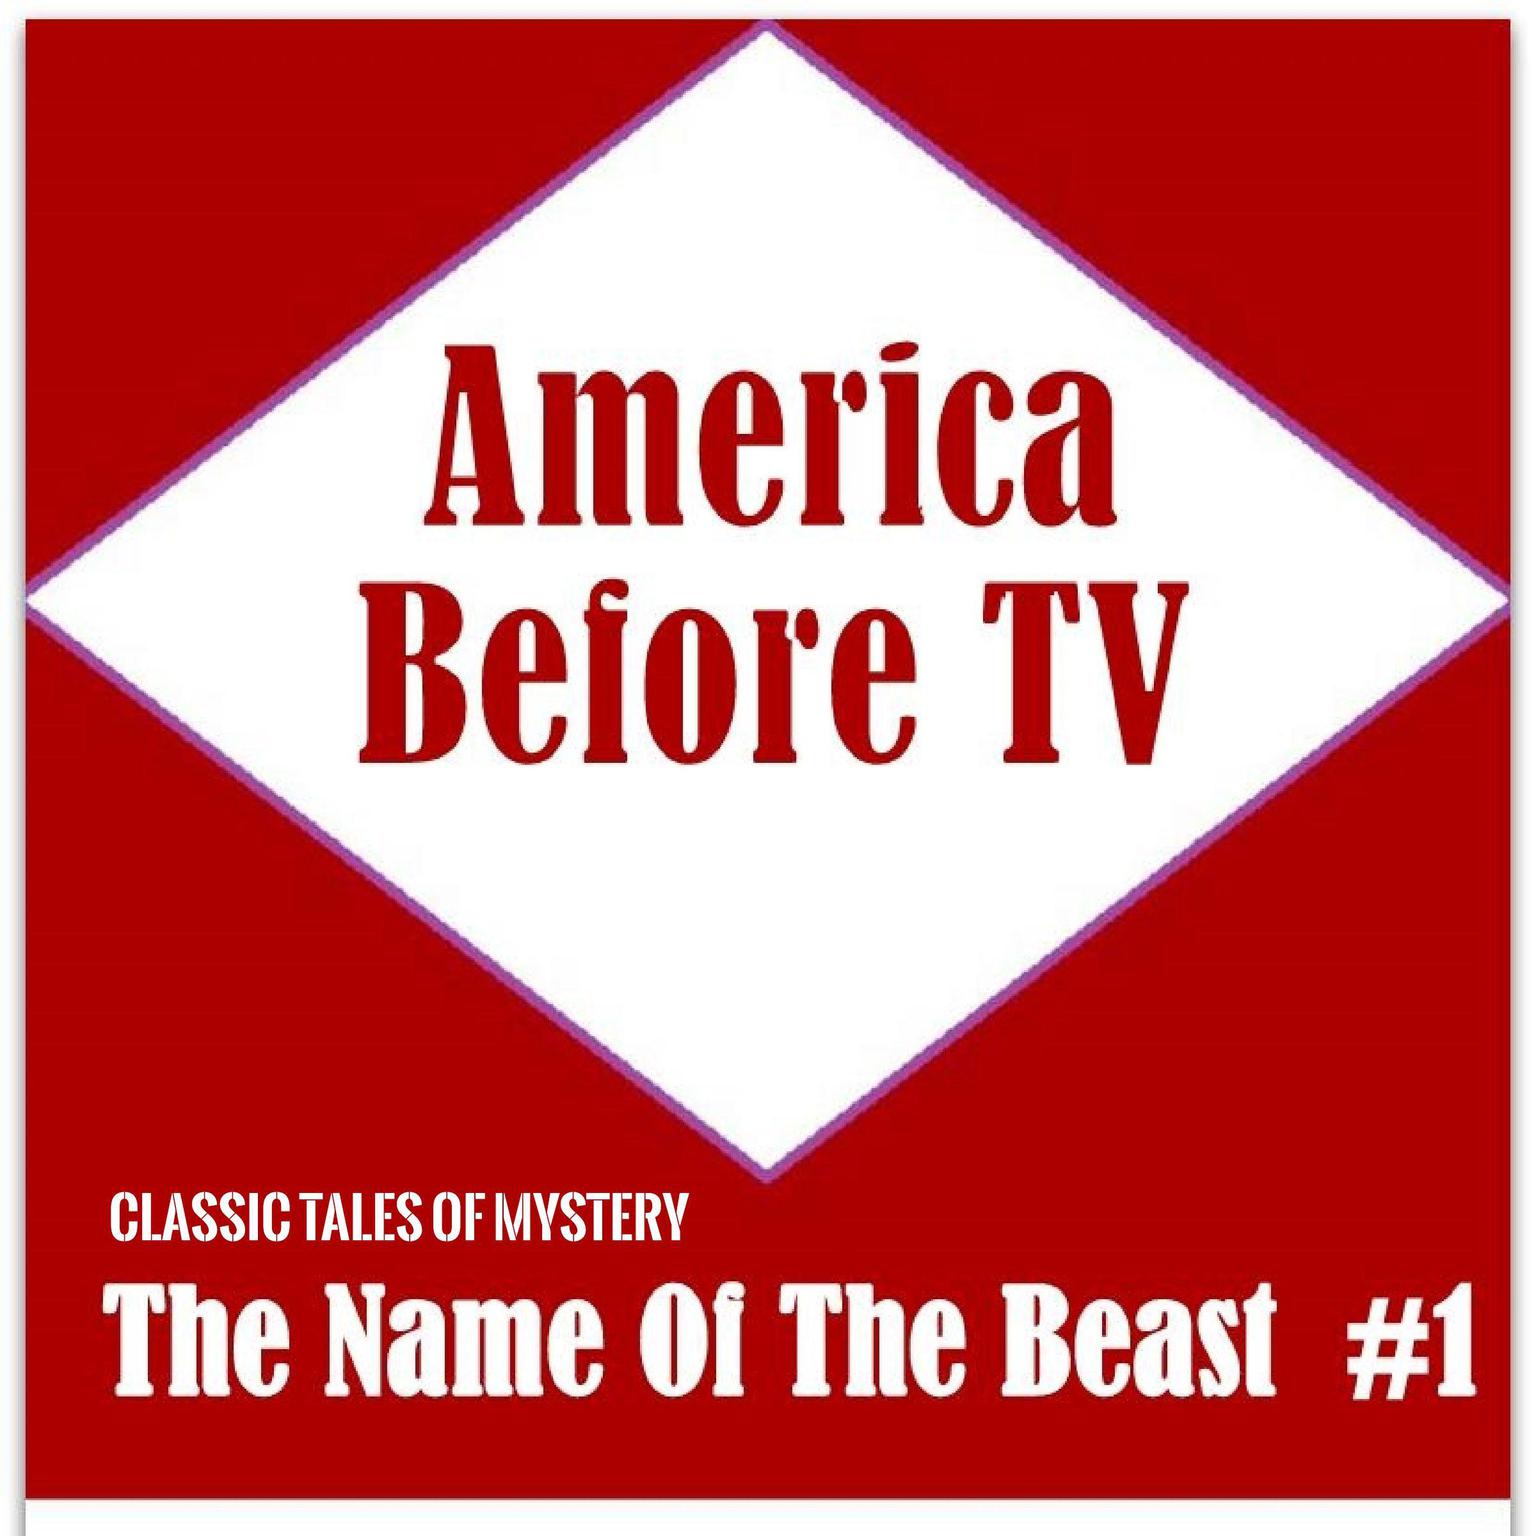 America Before TV - The Name Of The Beast  #1 (Abridged) Audiobook, by Classic Tales of Mystery